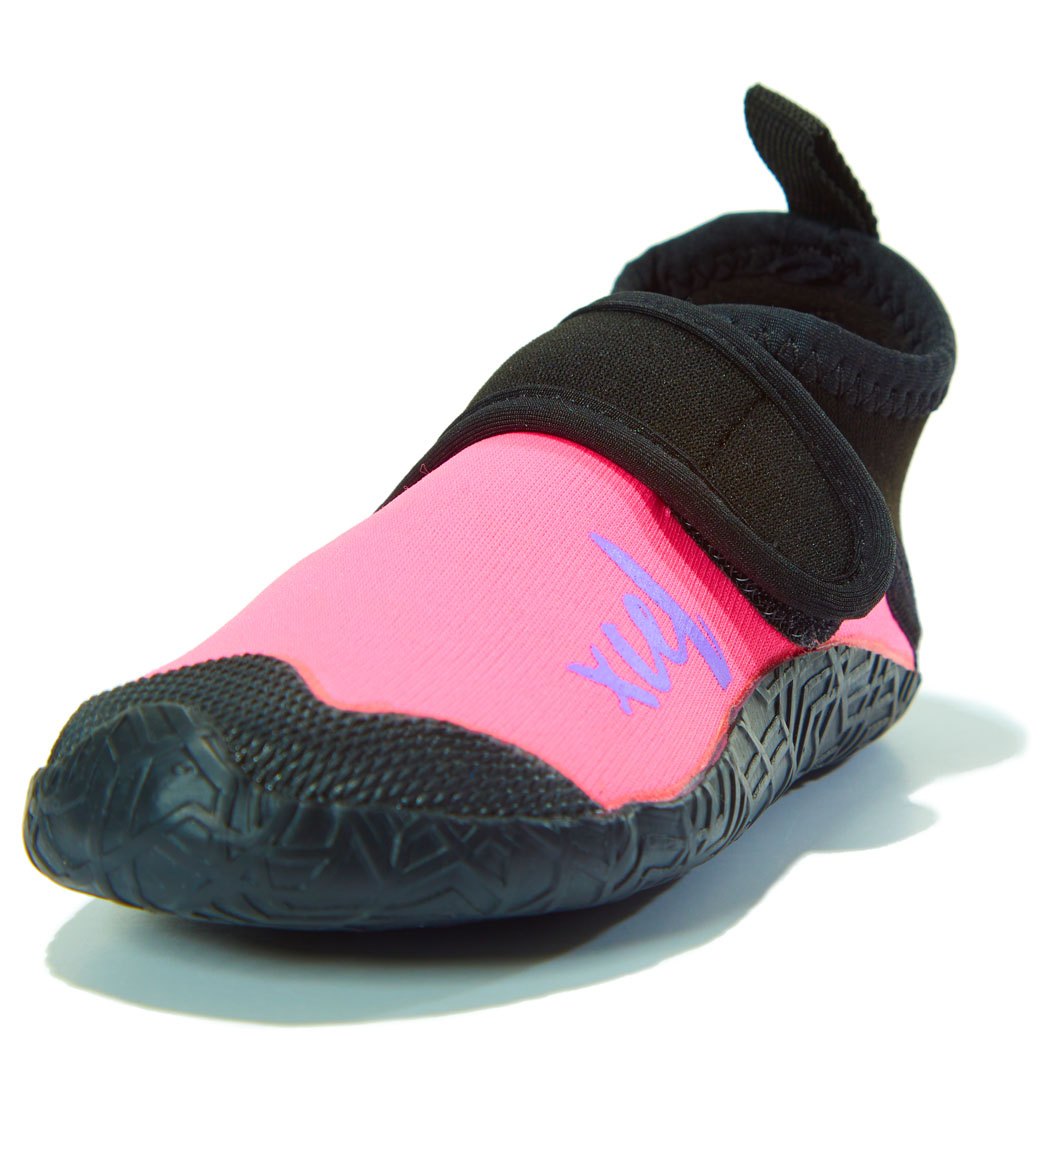 Xcel Water Shoes & Sandals at